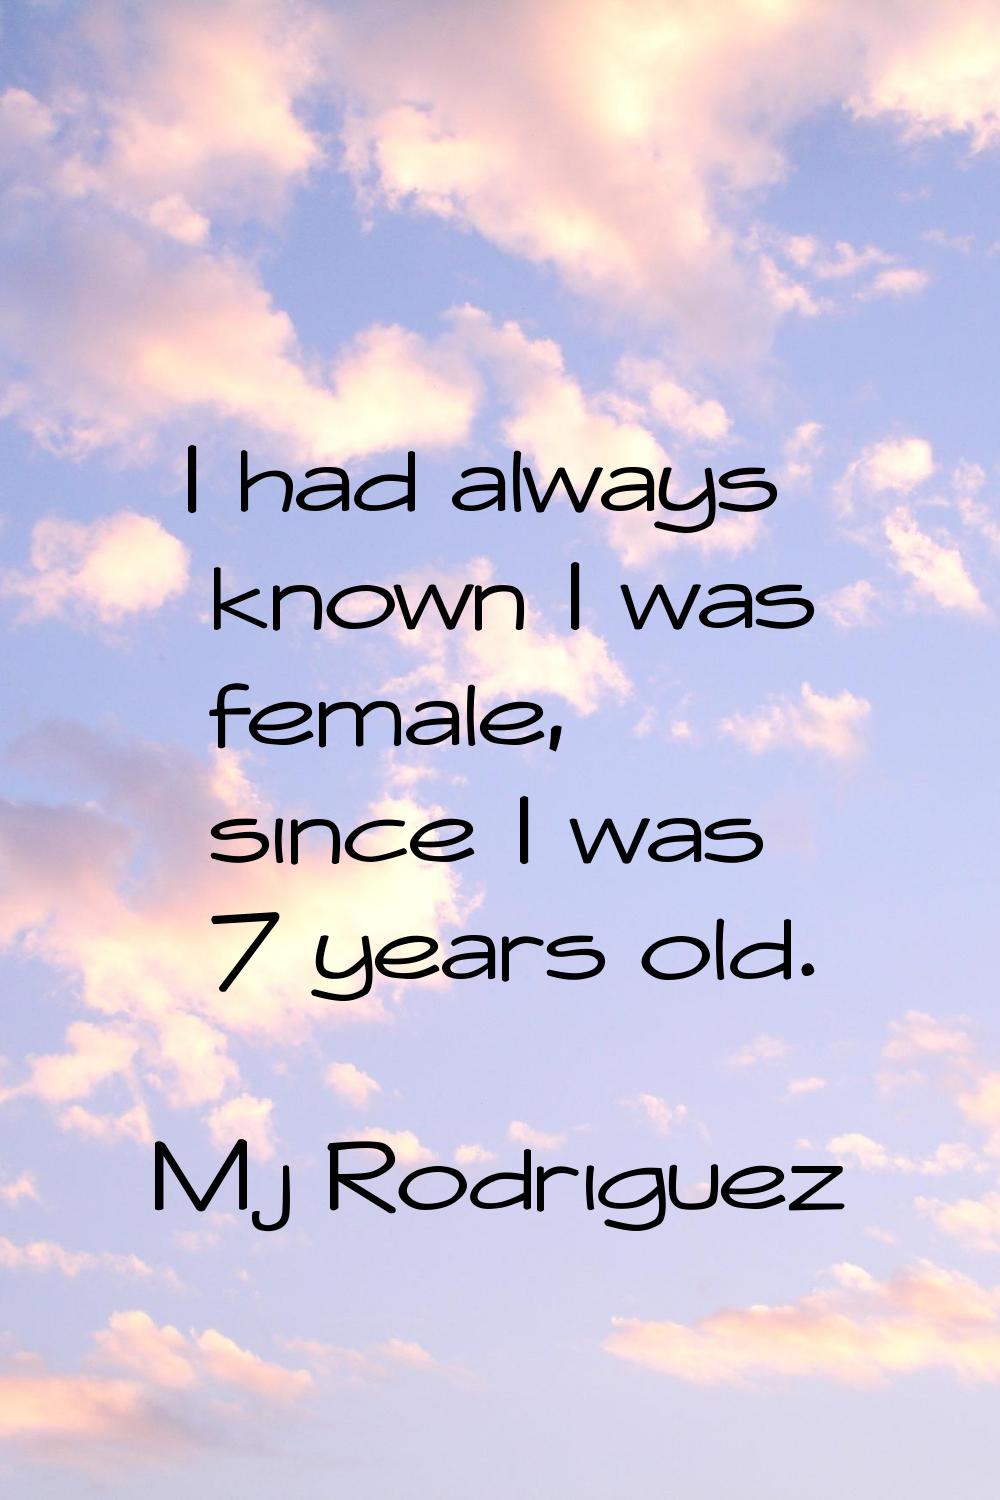 I had always known I was female, since I was 7 years old.